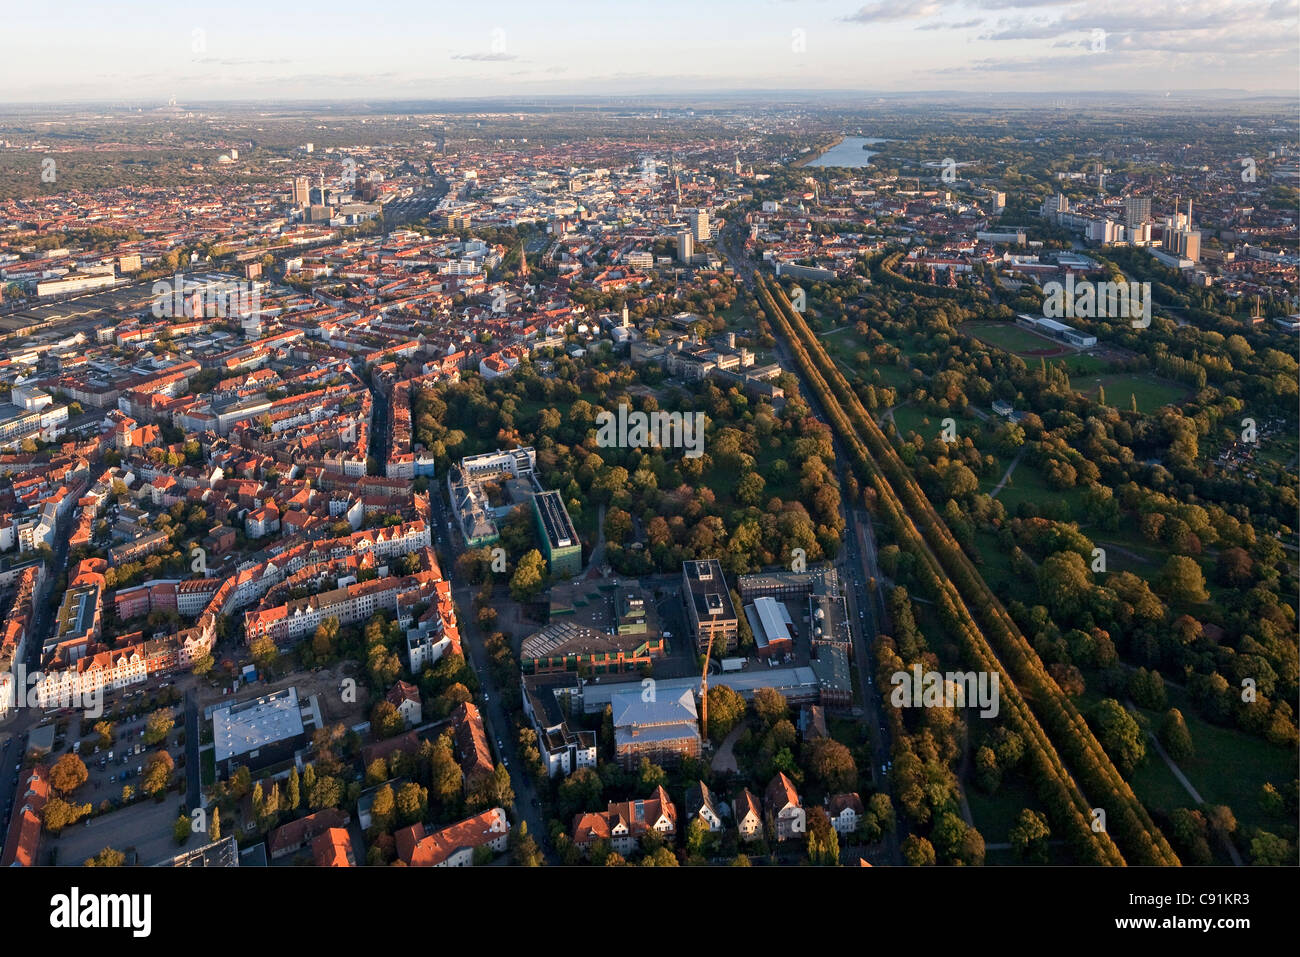 Aerial view of Hannover, avenue of trees connecting Herrenhausen Gardens to the inner city, Hannover, Lower Saxony, Germany Stock Photo